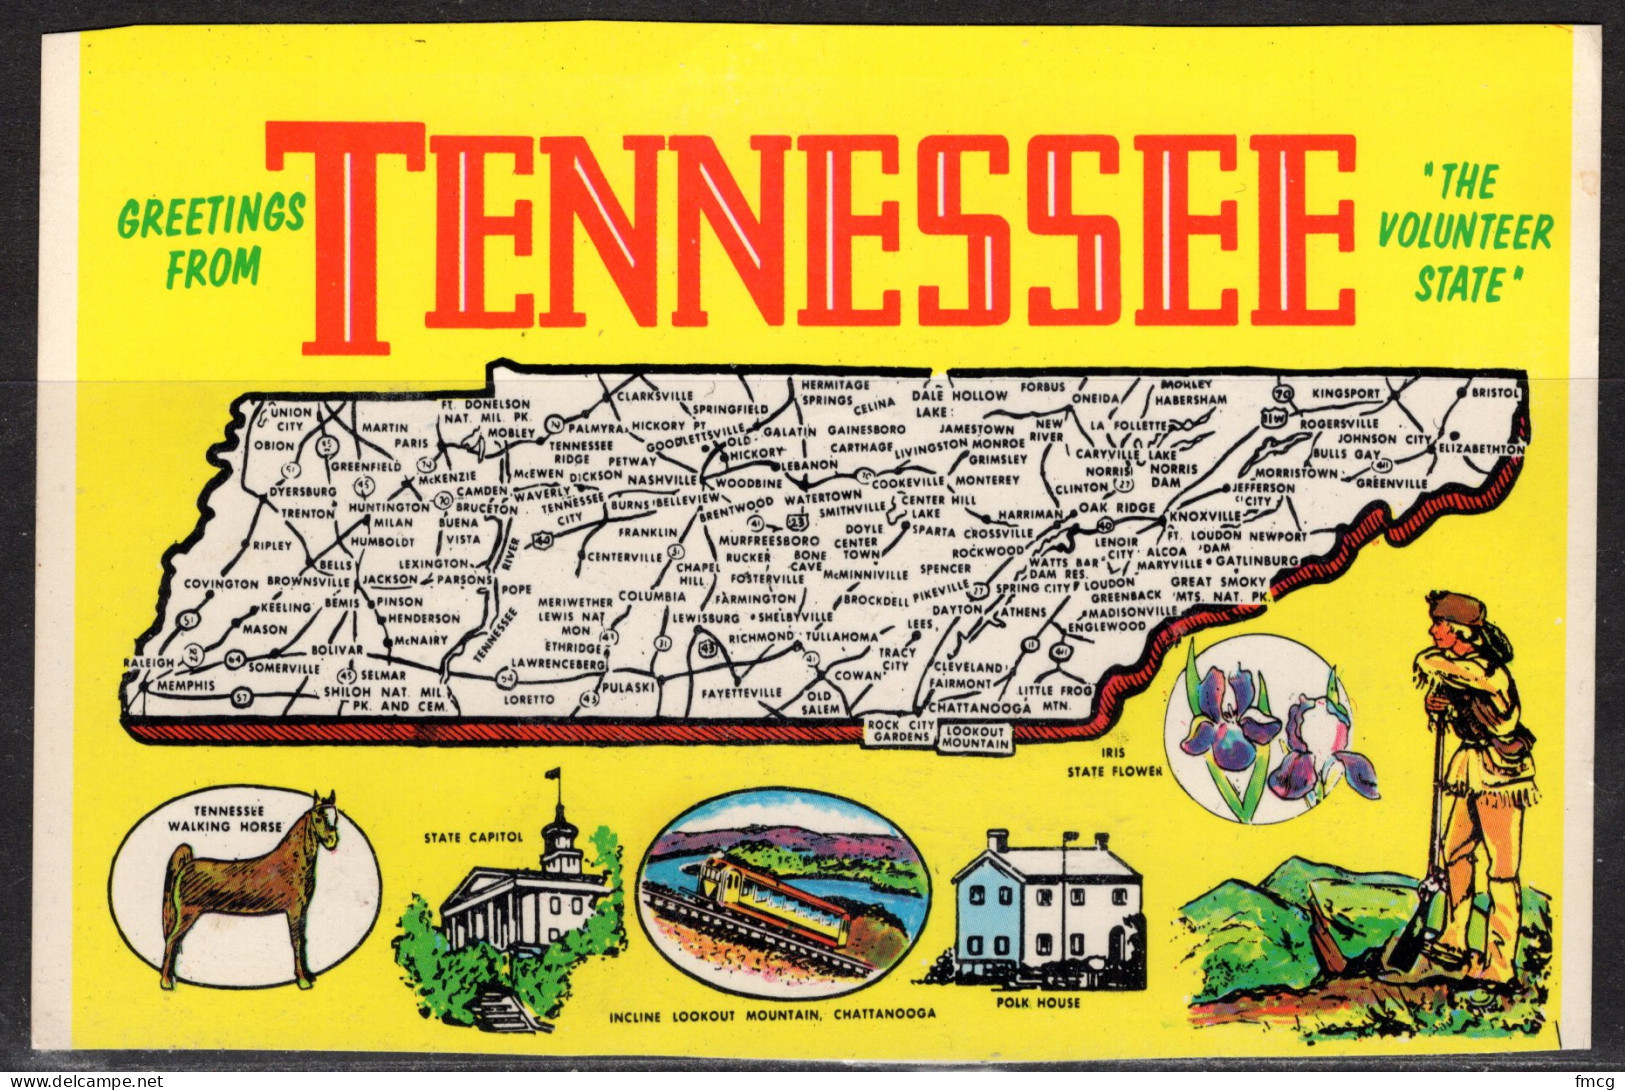 Map, United States, Tennessee, New - Mapas